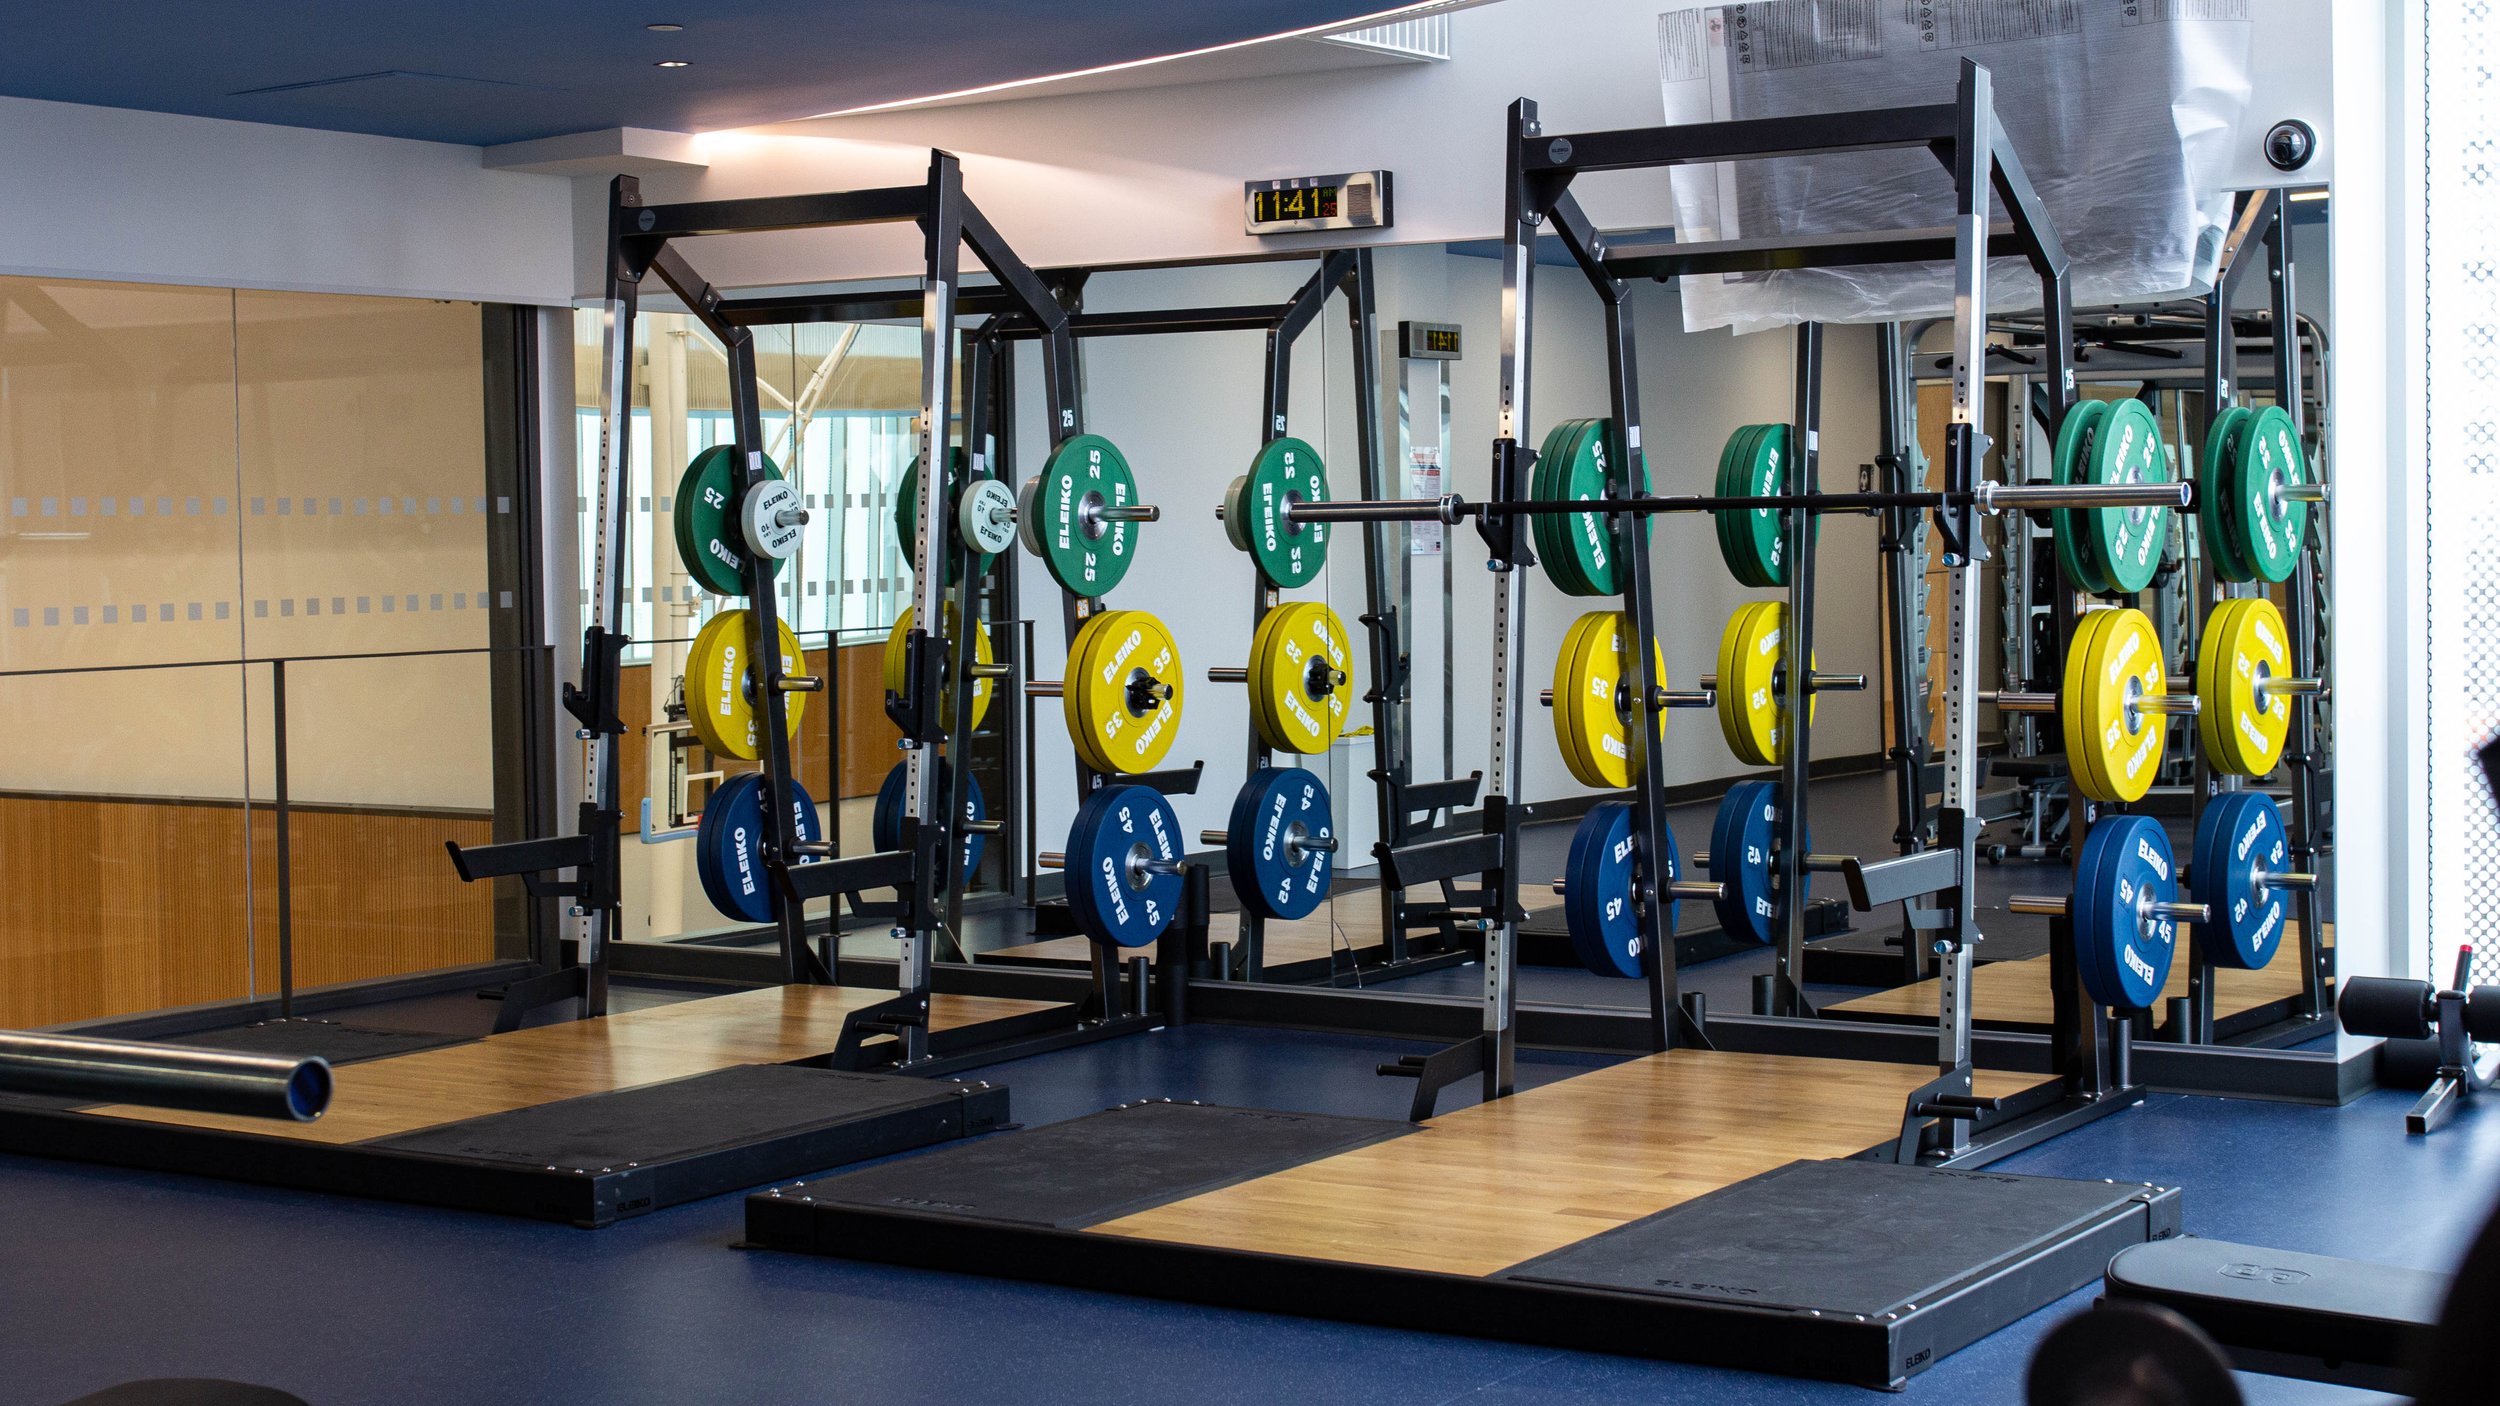  A bar of three sets of weights: on the bottom blue weights, then yellow and then green. Underneath a navy mat with mirrors behind the weights.  